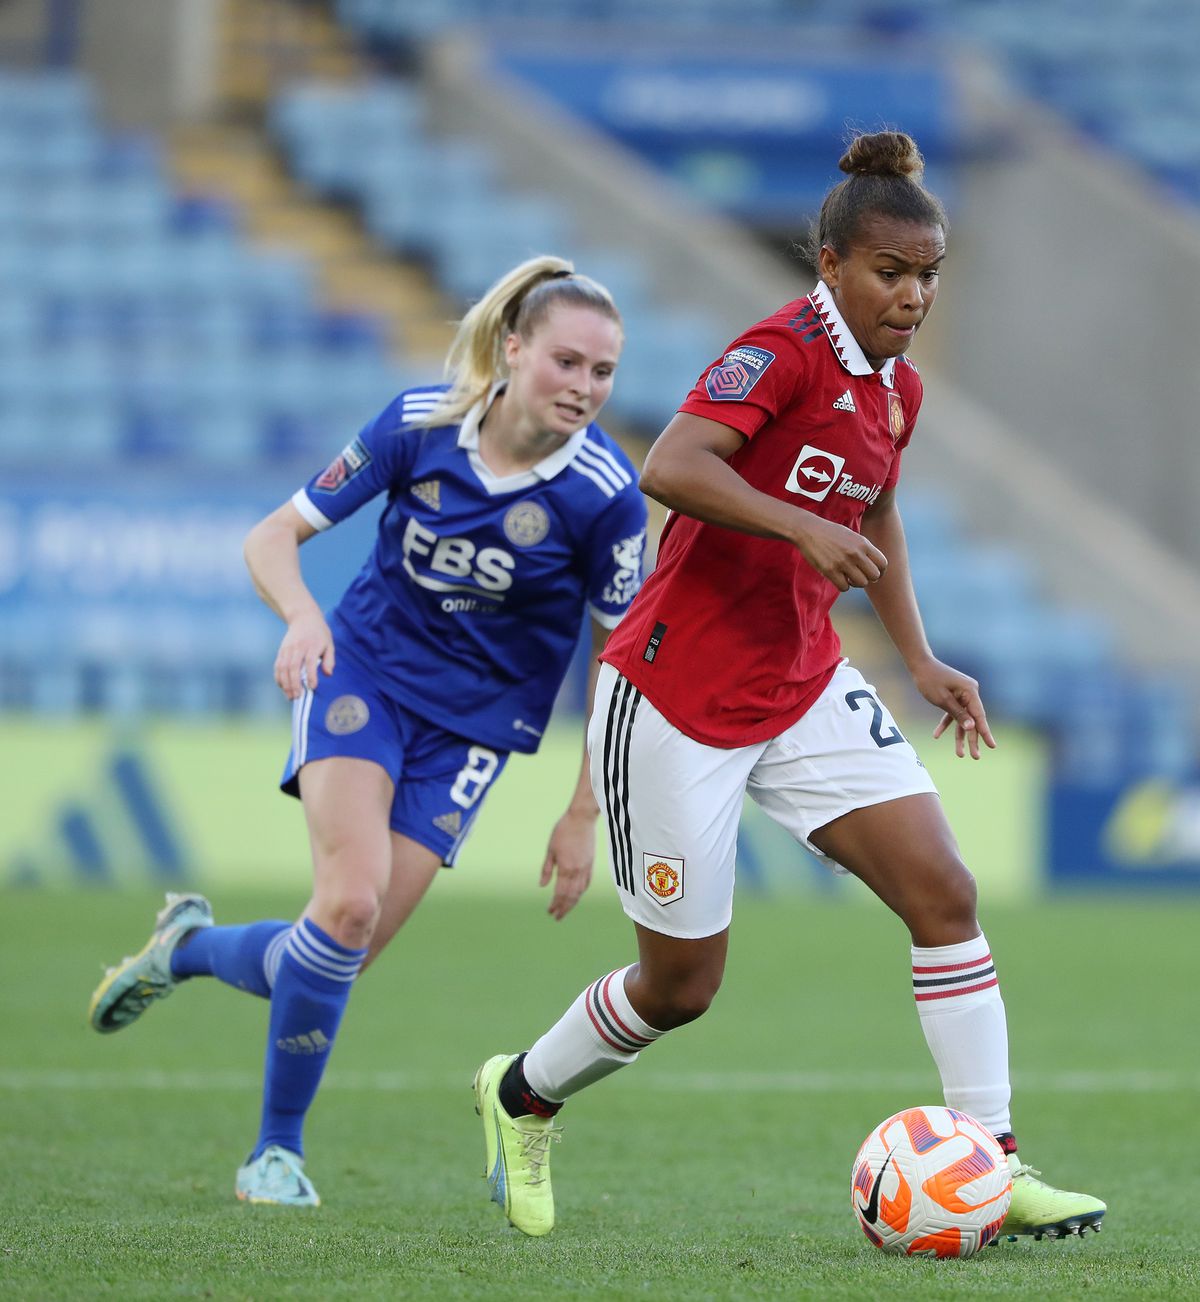 Leicester City v Manchester United - Barclays Women’s Super League